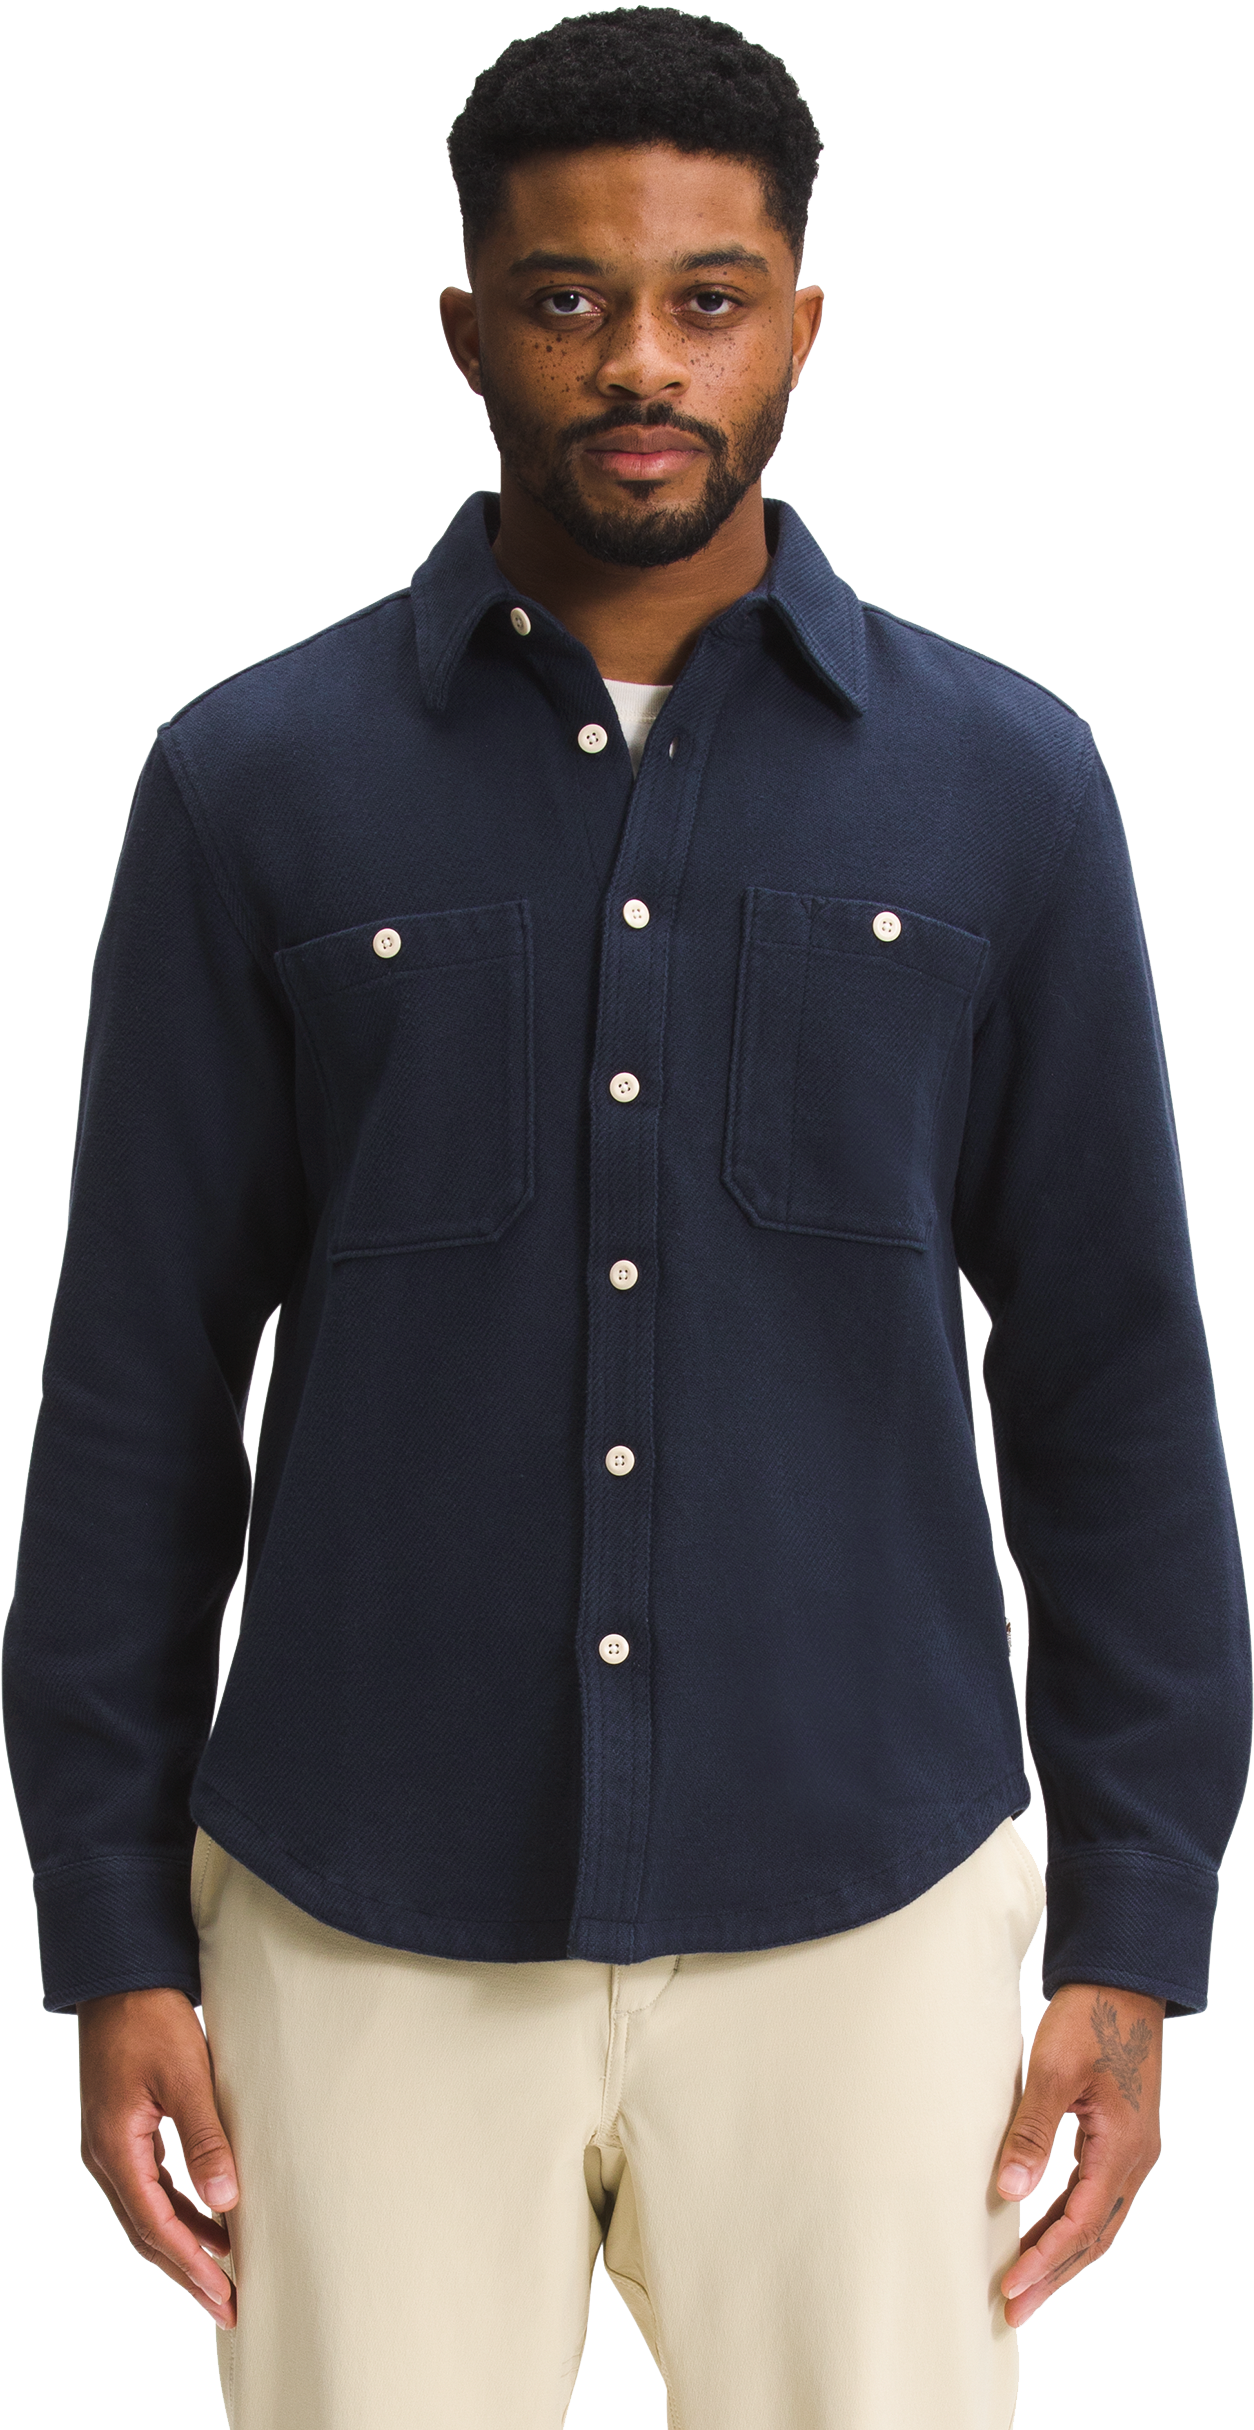 The North Face Valley Twill Flannel Long-Sleeve Shirt for Men - Aviator Navy - S